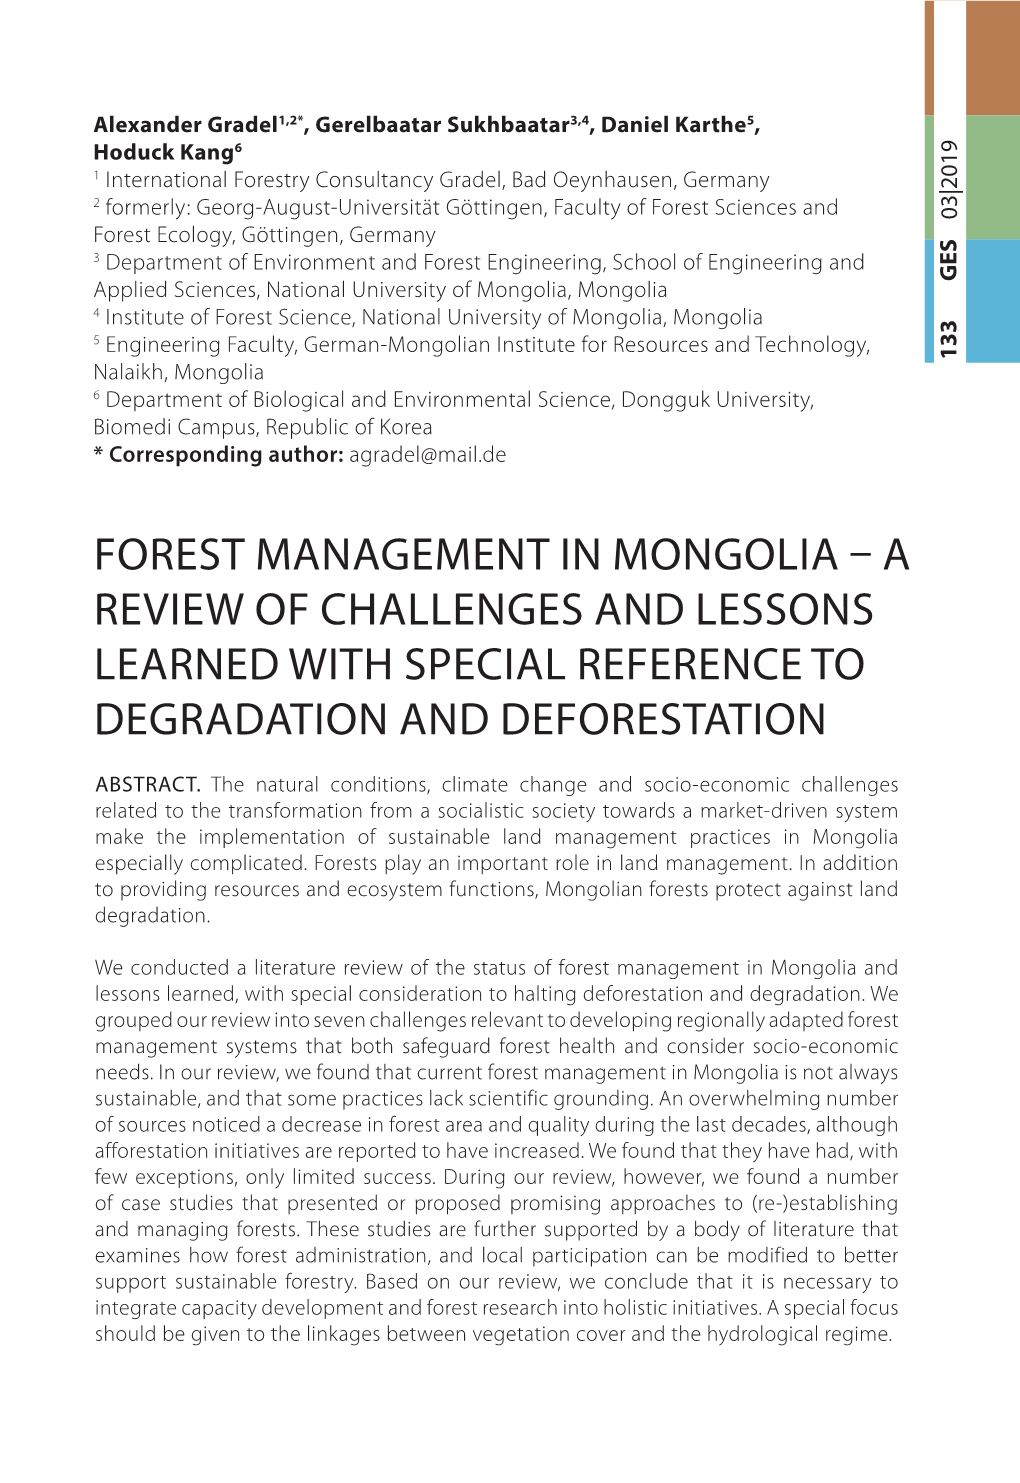 Forest Management in Mongolia